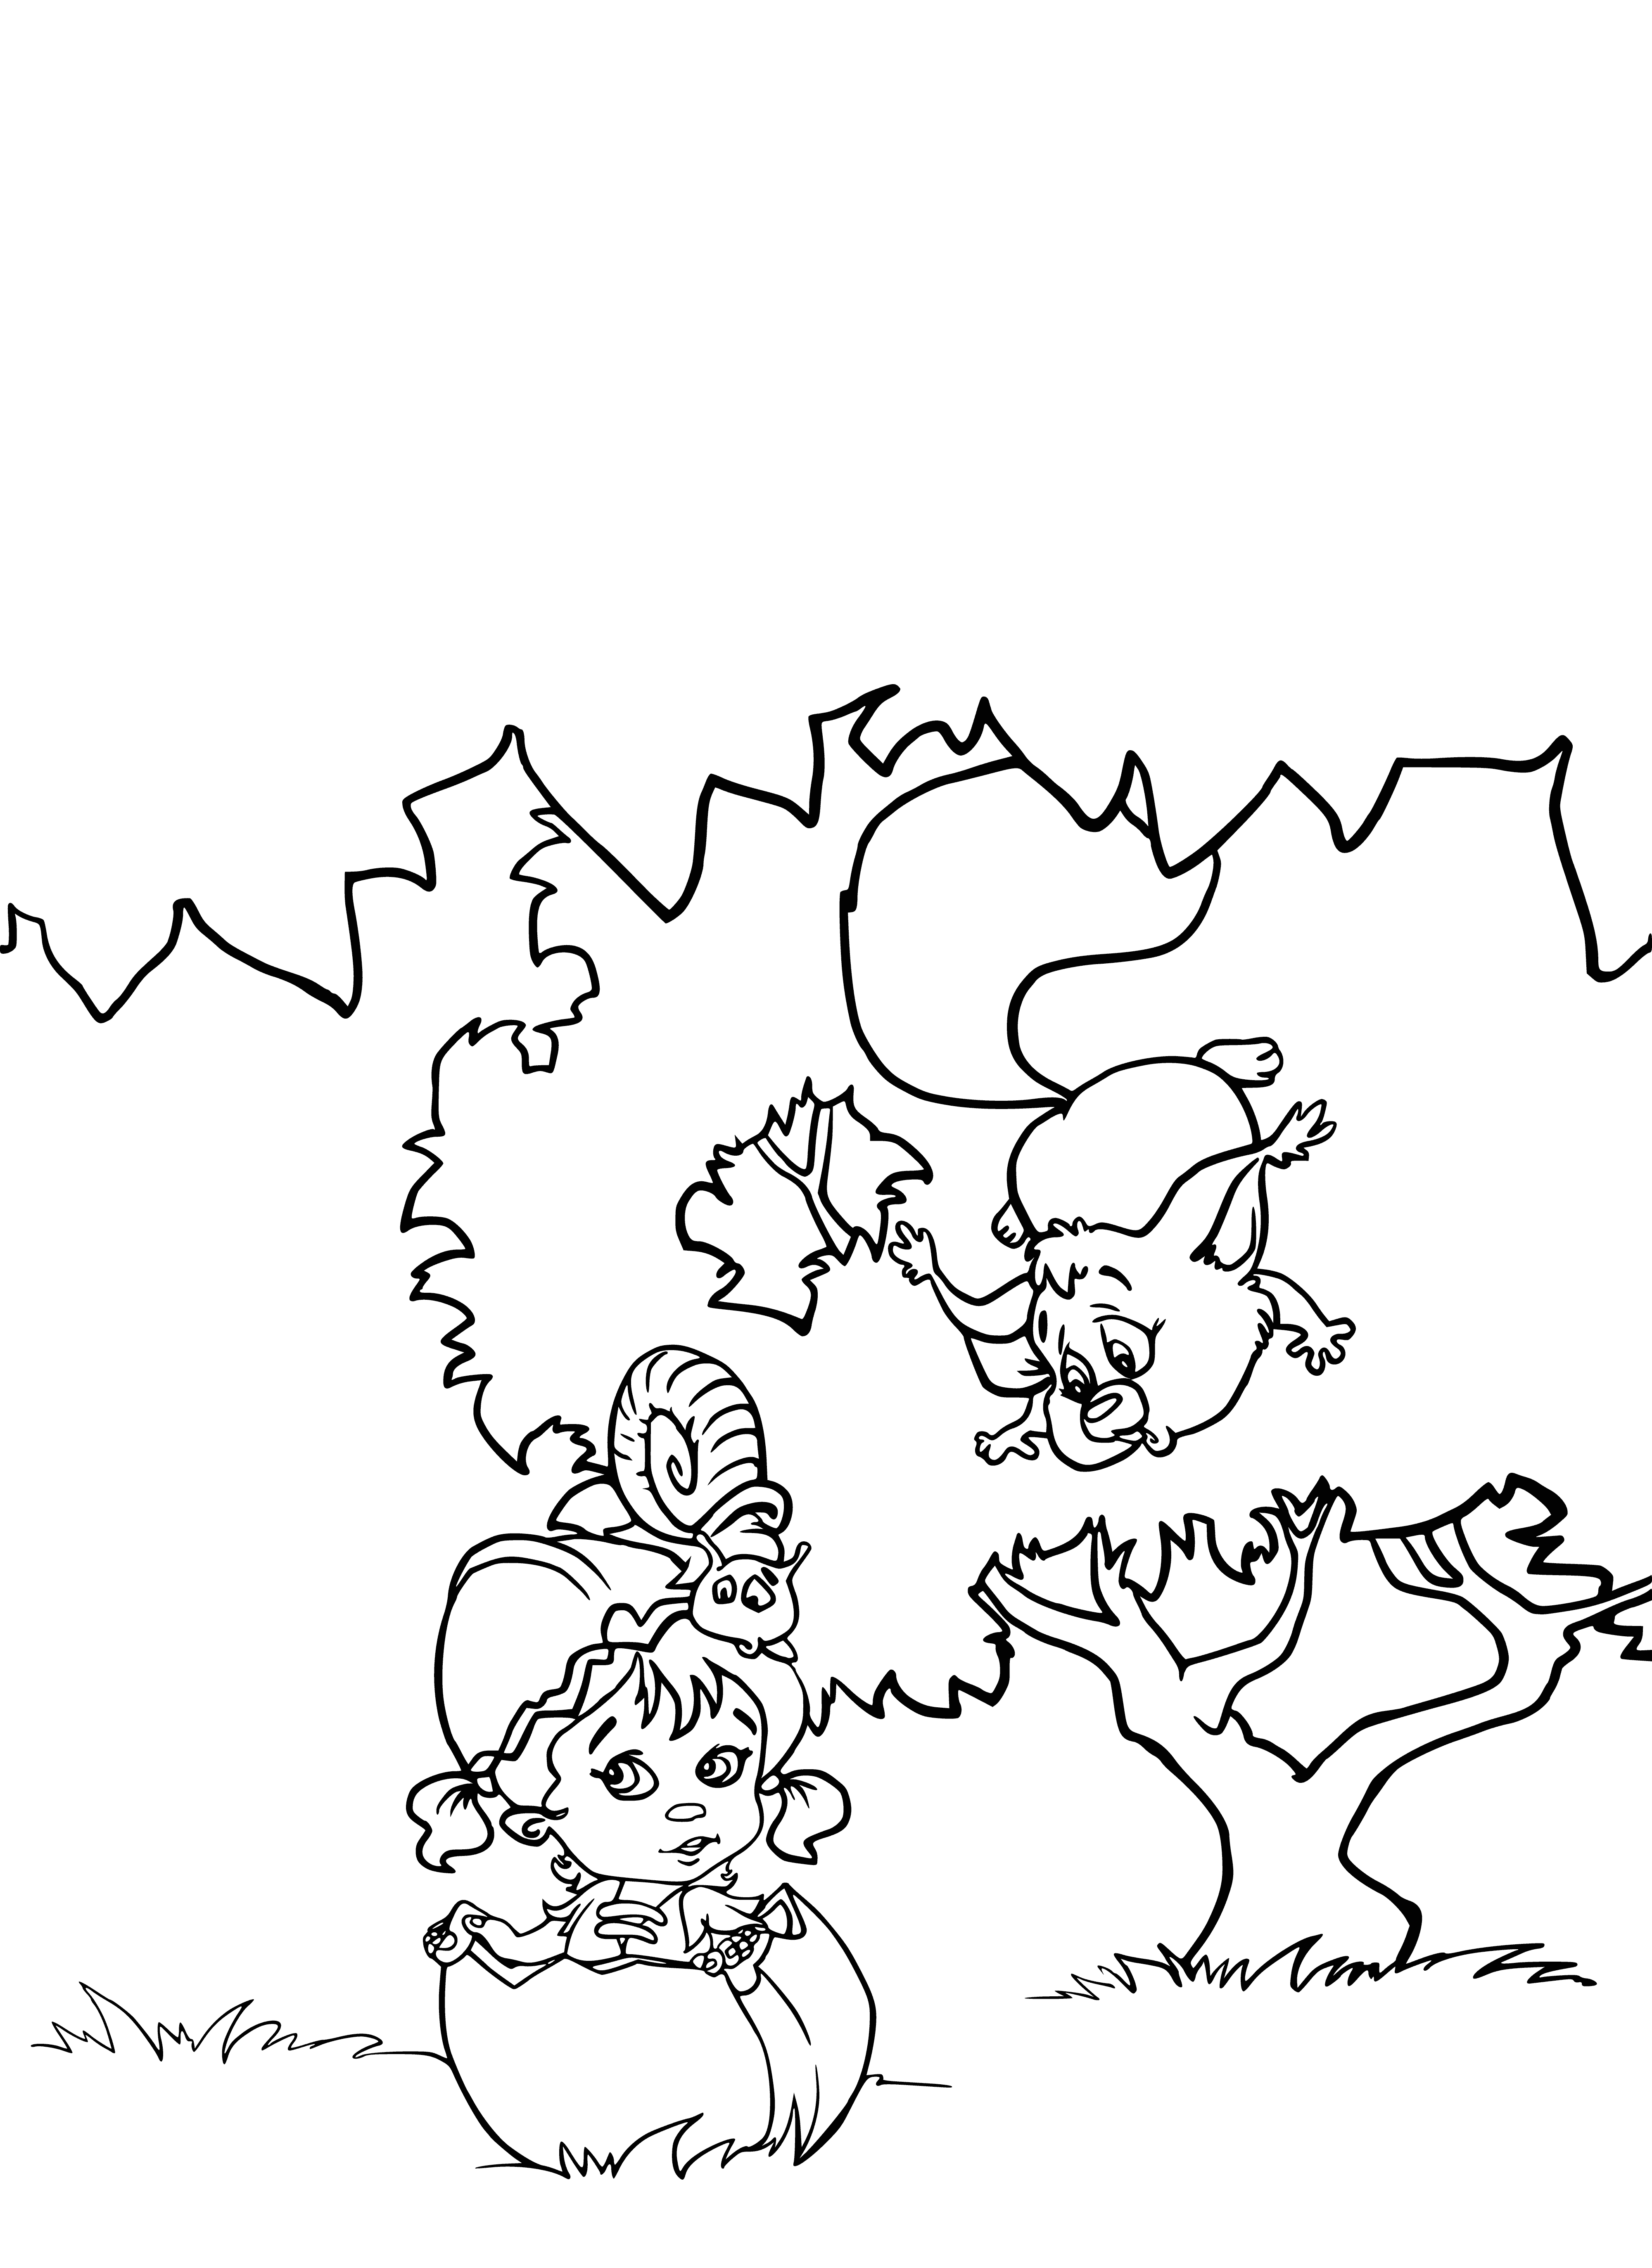 coloring page: Oreshenka, Nut and Cocoa are three best friends who always bring joy and laughter to each other's lives. #friendship